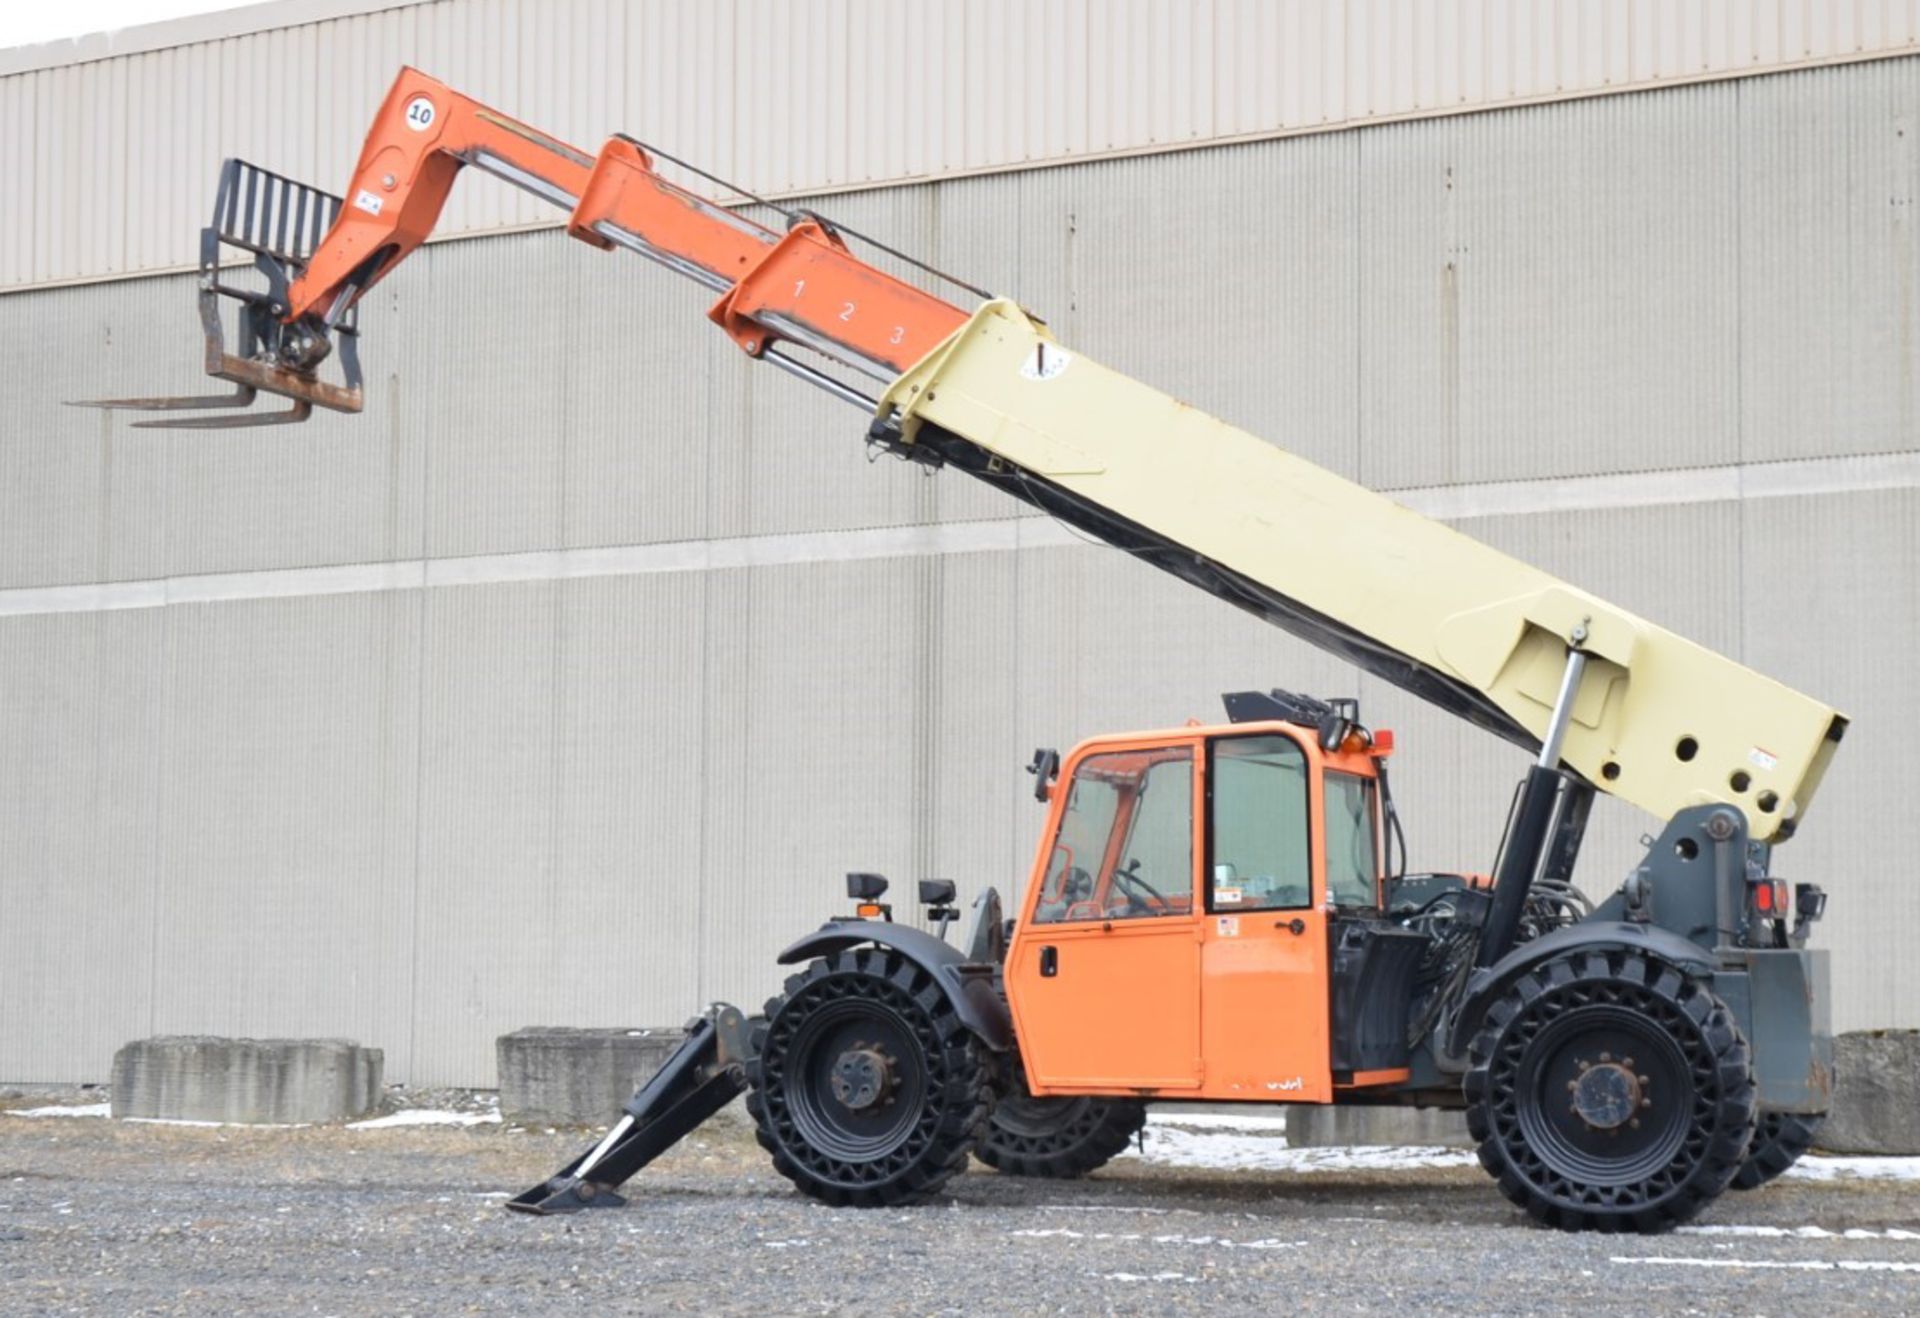 JLG (2011) G10-55A 10,000 LBS. CAPACITY DIESEL TELEHANDLER FORKLIFT WITH 56' MAX VERTICAL LIFT, - Image 15 of 23